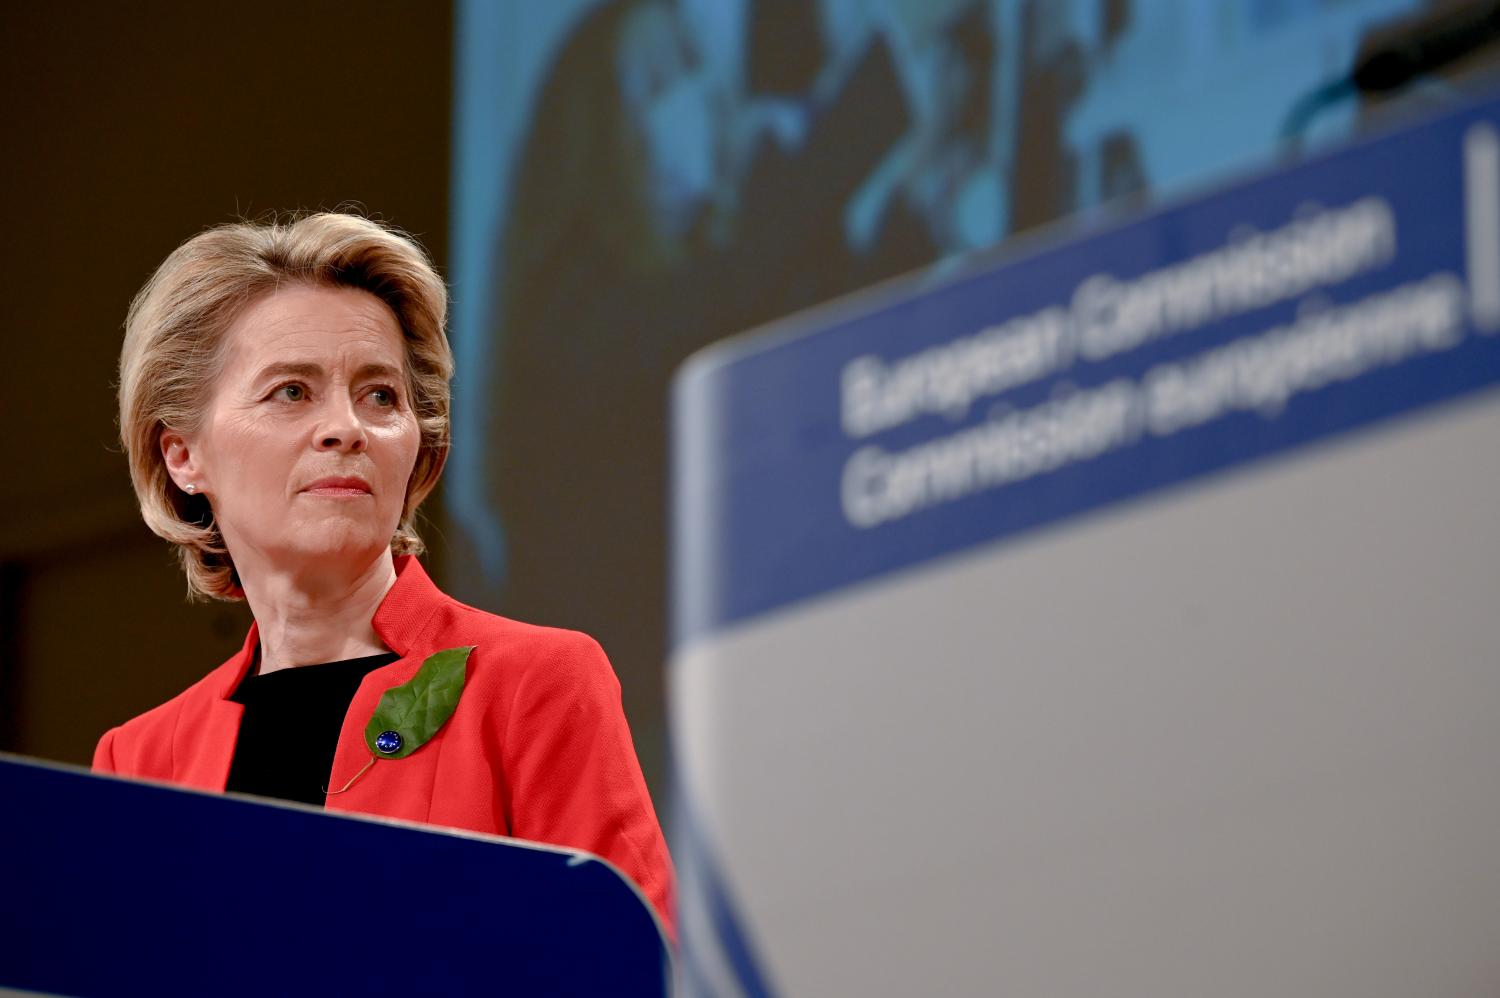 European Commission President Ursula von der Leyen speaks during a press conference on the Commission's response to COVID-19 and the EU new vaccine certificate. The European Commission on Wednesday proposed the introduction of a vaccine certificate - the Digital Green Certificate - which would be recognized by all 27 member states.